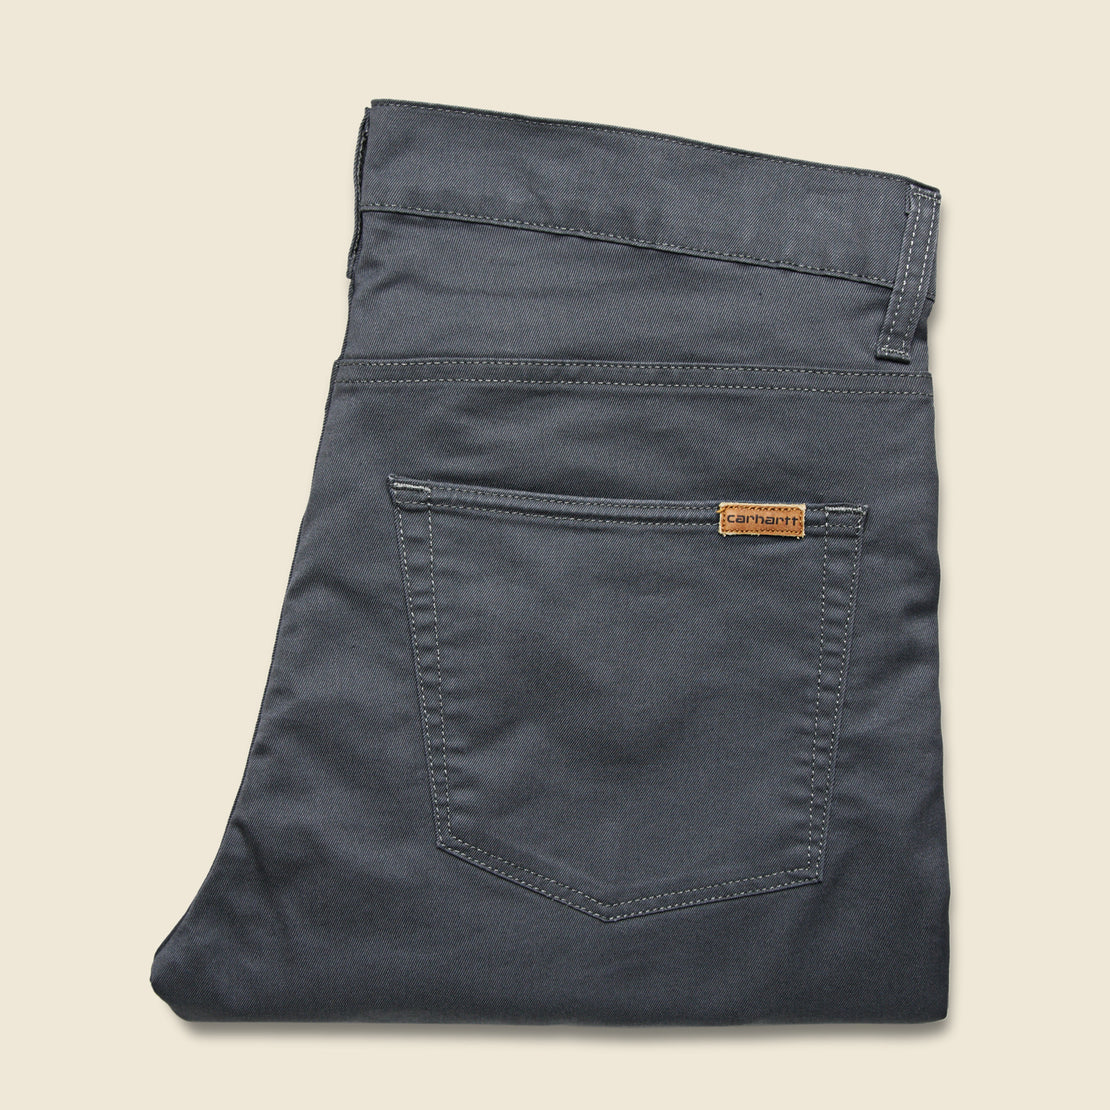 Vicious Pant - Blacksmith - Carhartt WIP - STAG Provisions - Pants - Twill